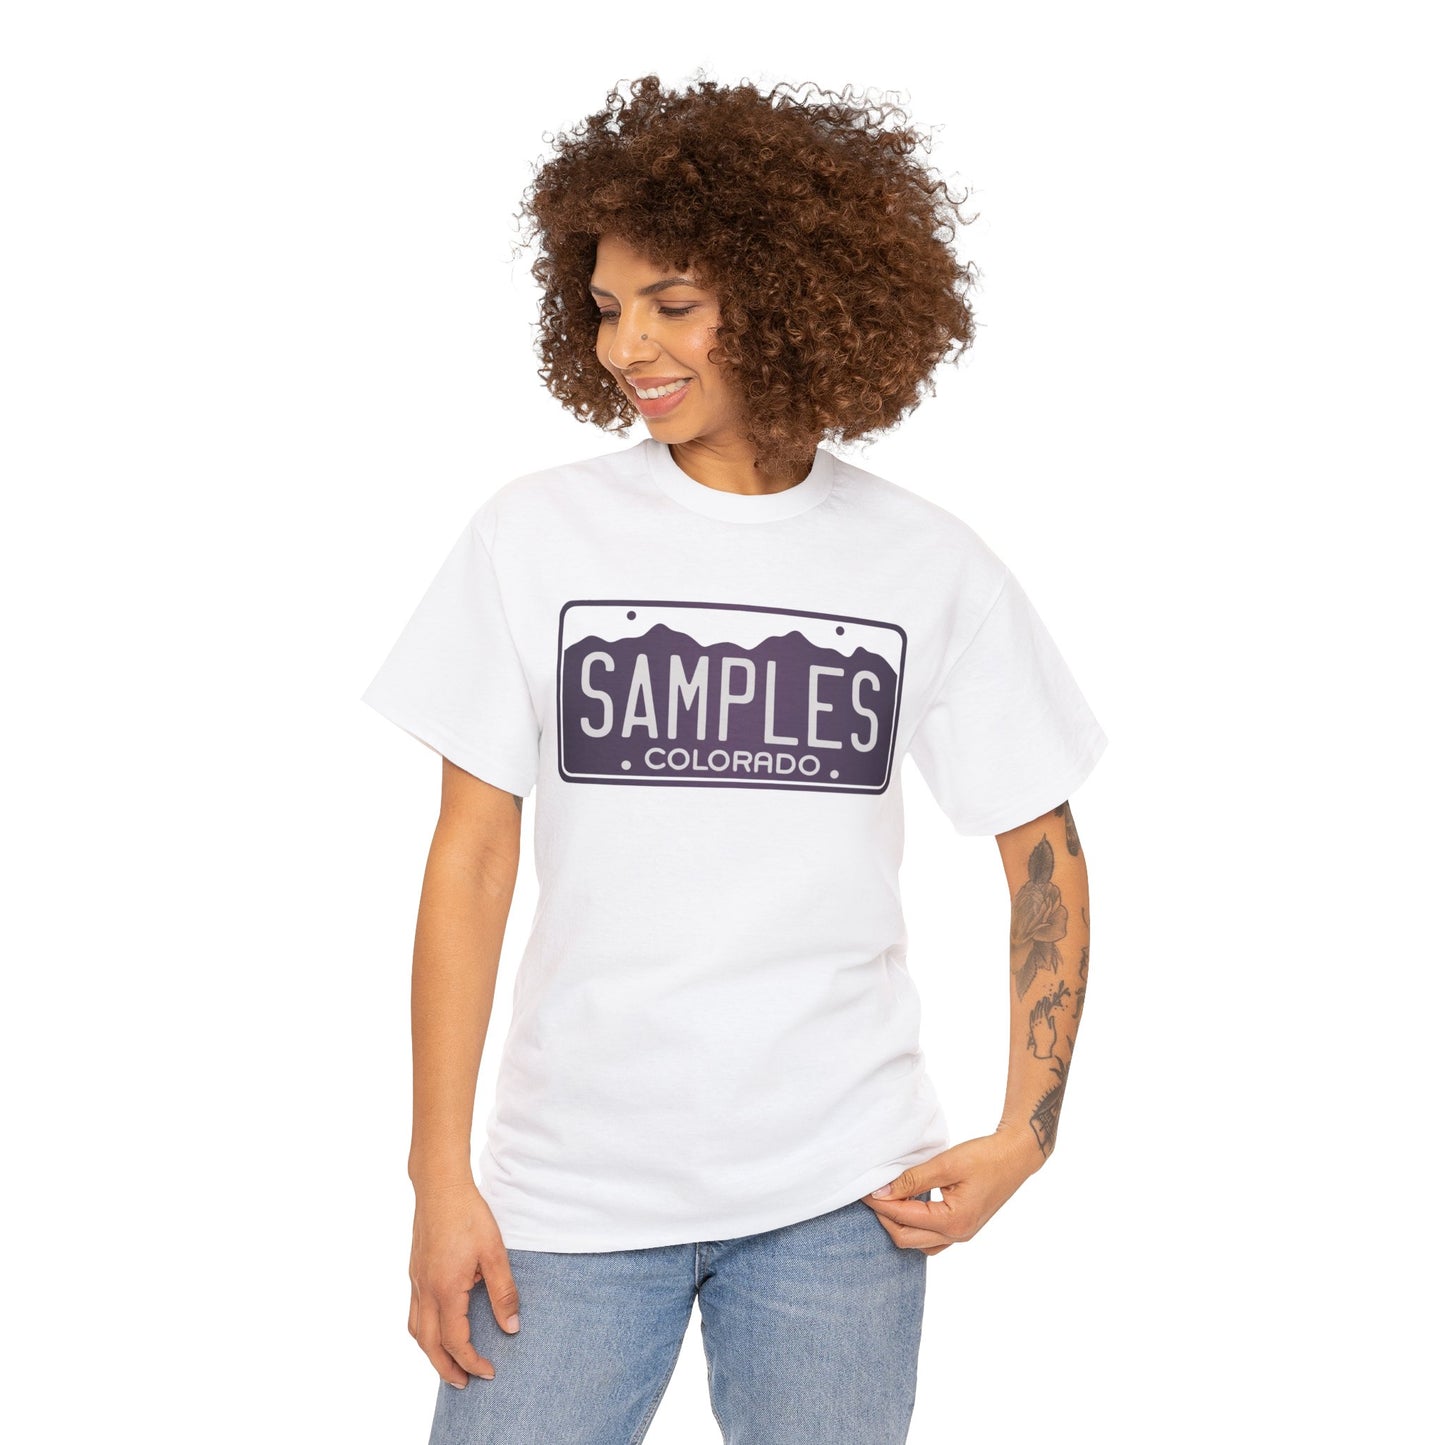 The Samples Colorado License Plate 1995 T-shirt for Sale